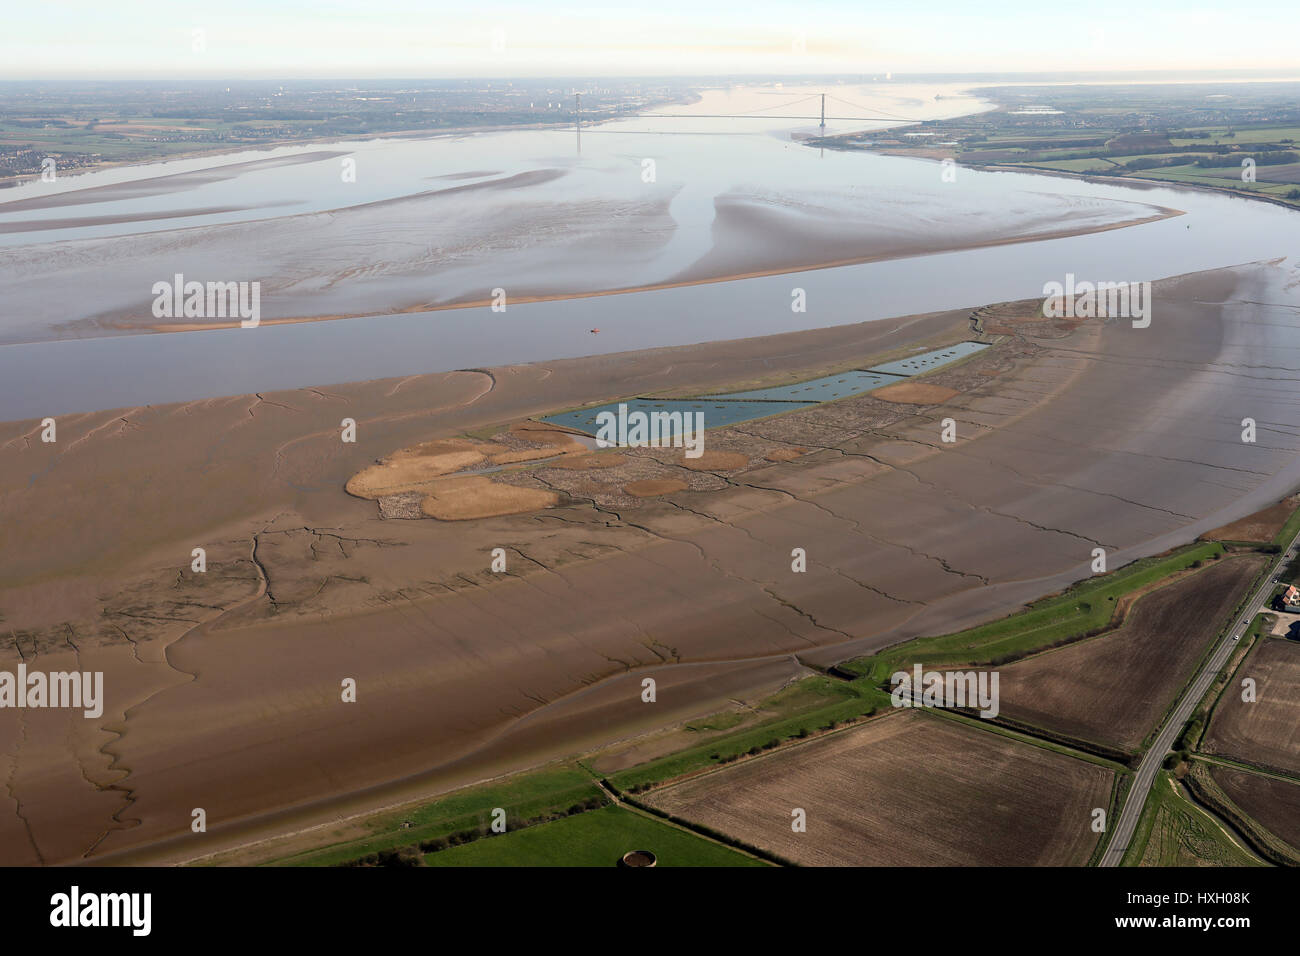 aerial view of the Humber, Read's Island & Humber Bridge, East Yorkshire, UK Stock Photo